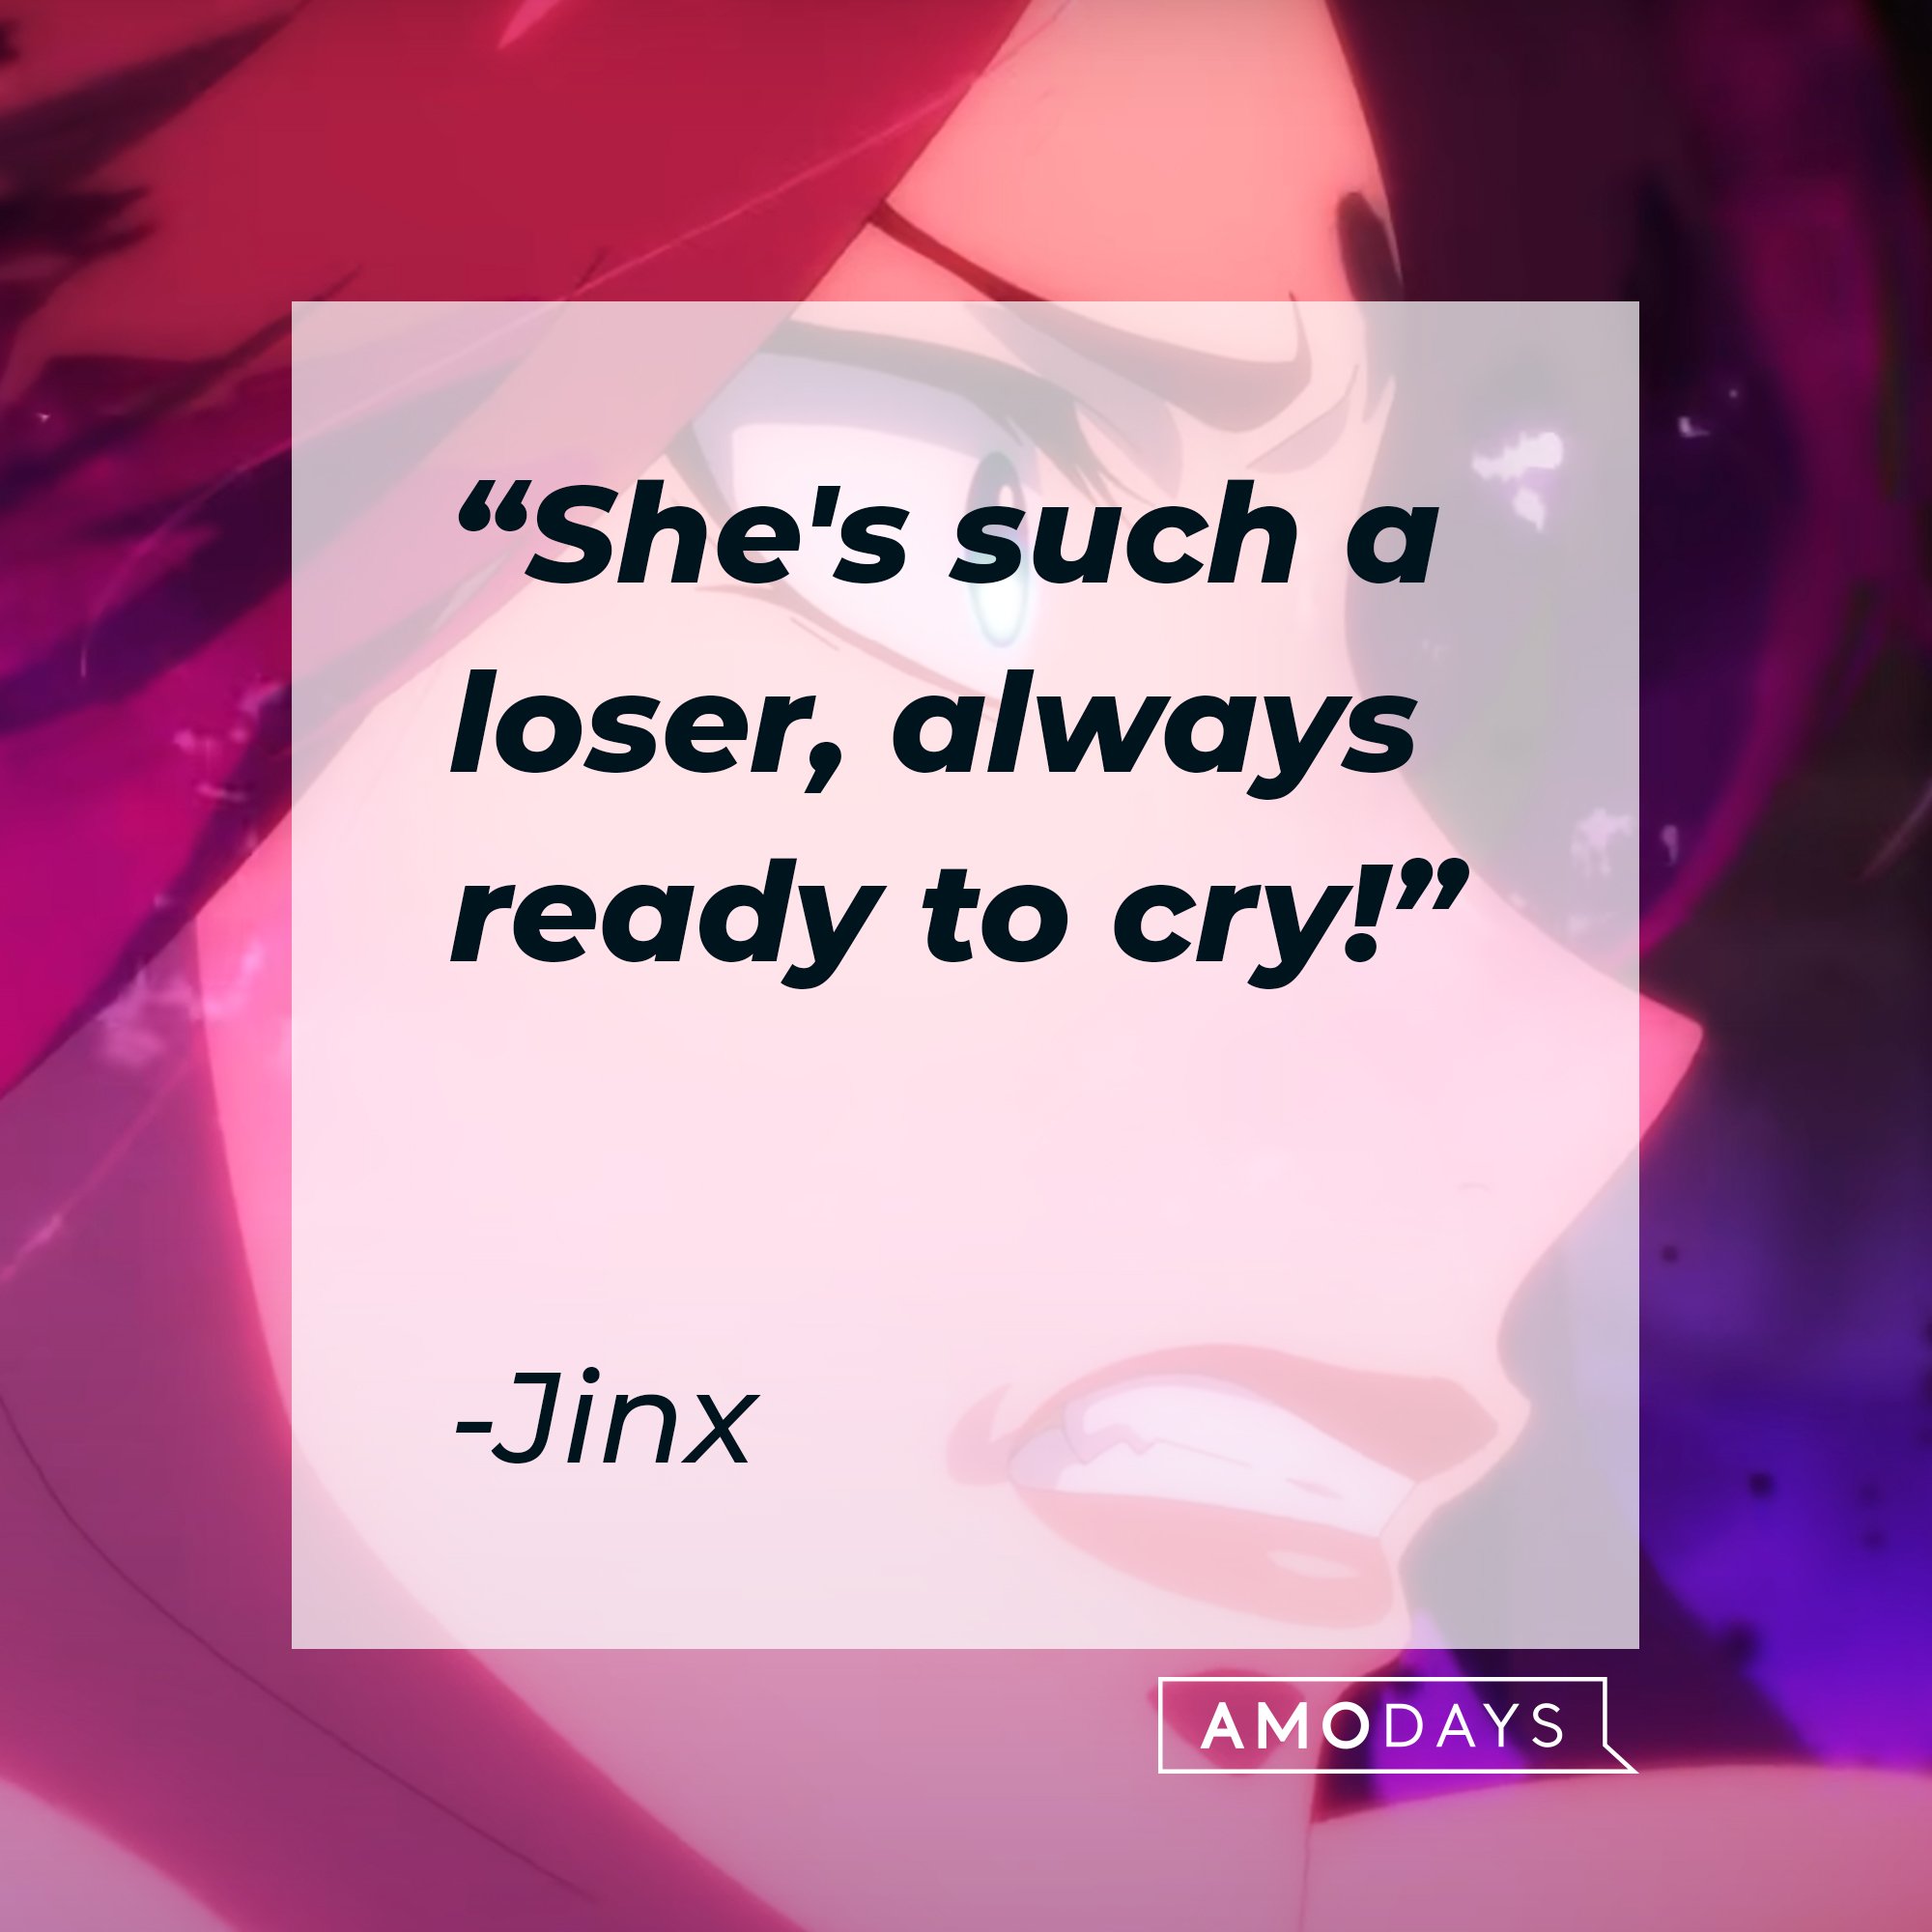 Jinx's quote: "She's such a loser, always ready to cry!" | Image: AmoDays